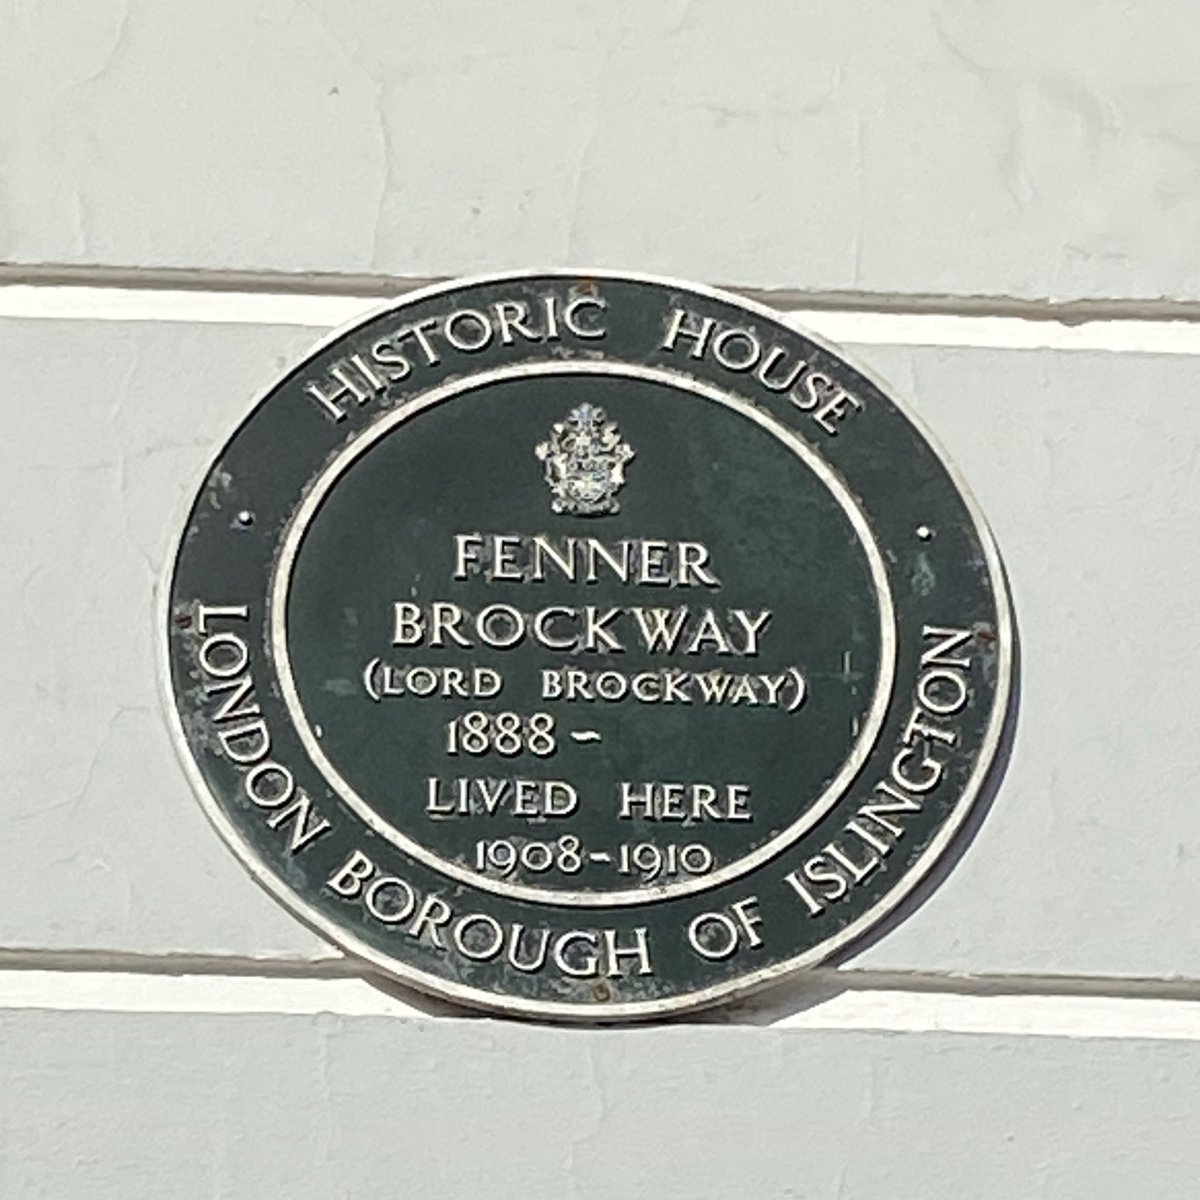 I find it SO annoying when plaques don’t tell you what the person is famous for. This guy, for example, invented the elixir of eternal life, but is that mentioned here? No.